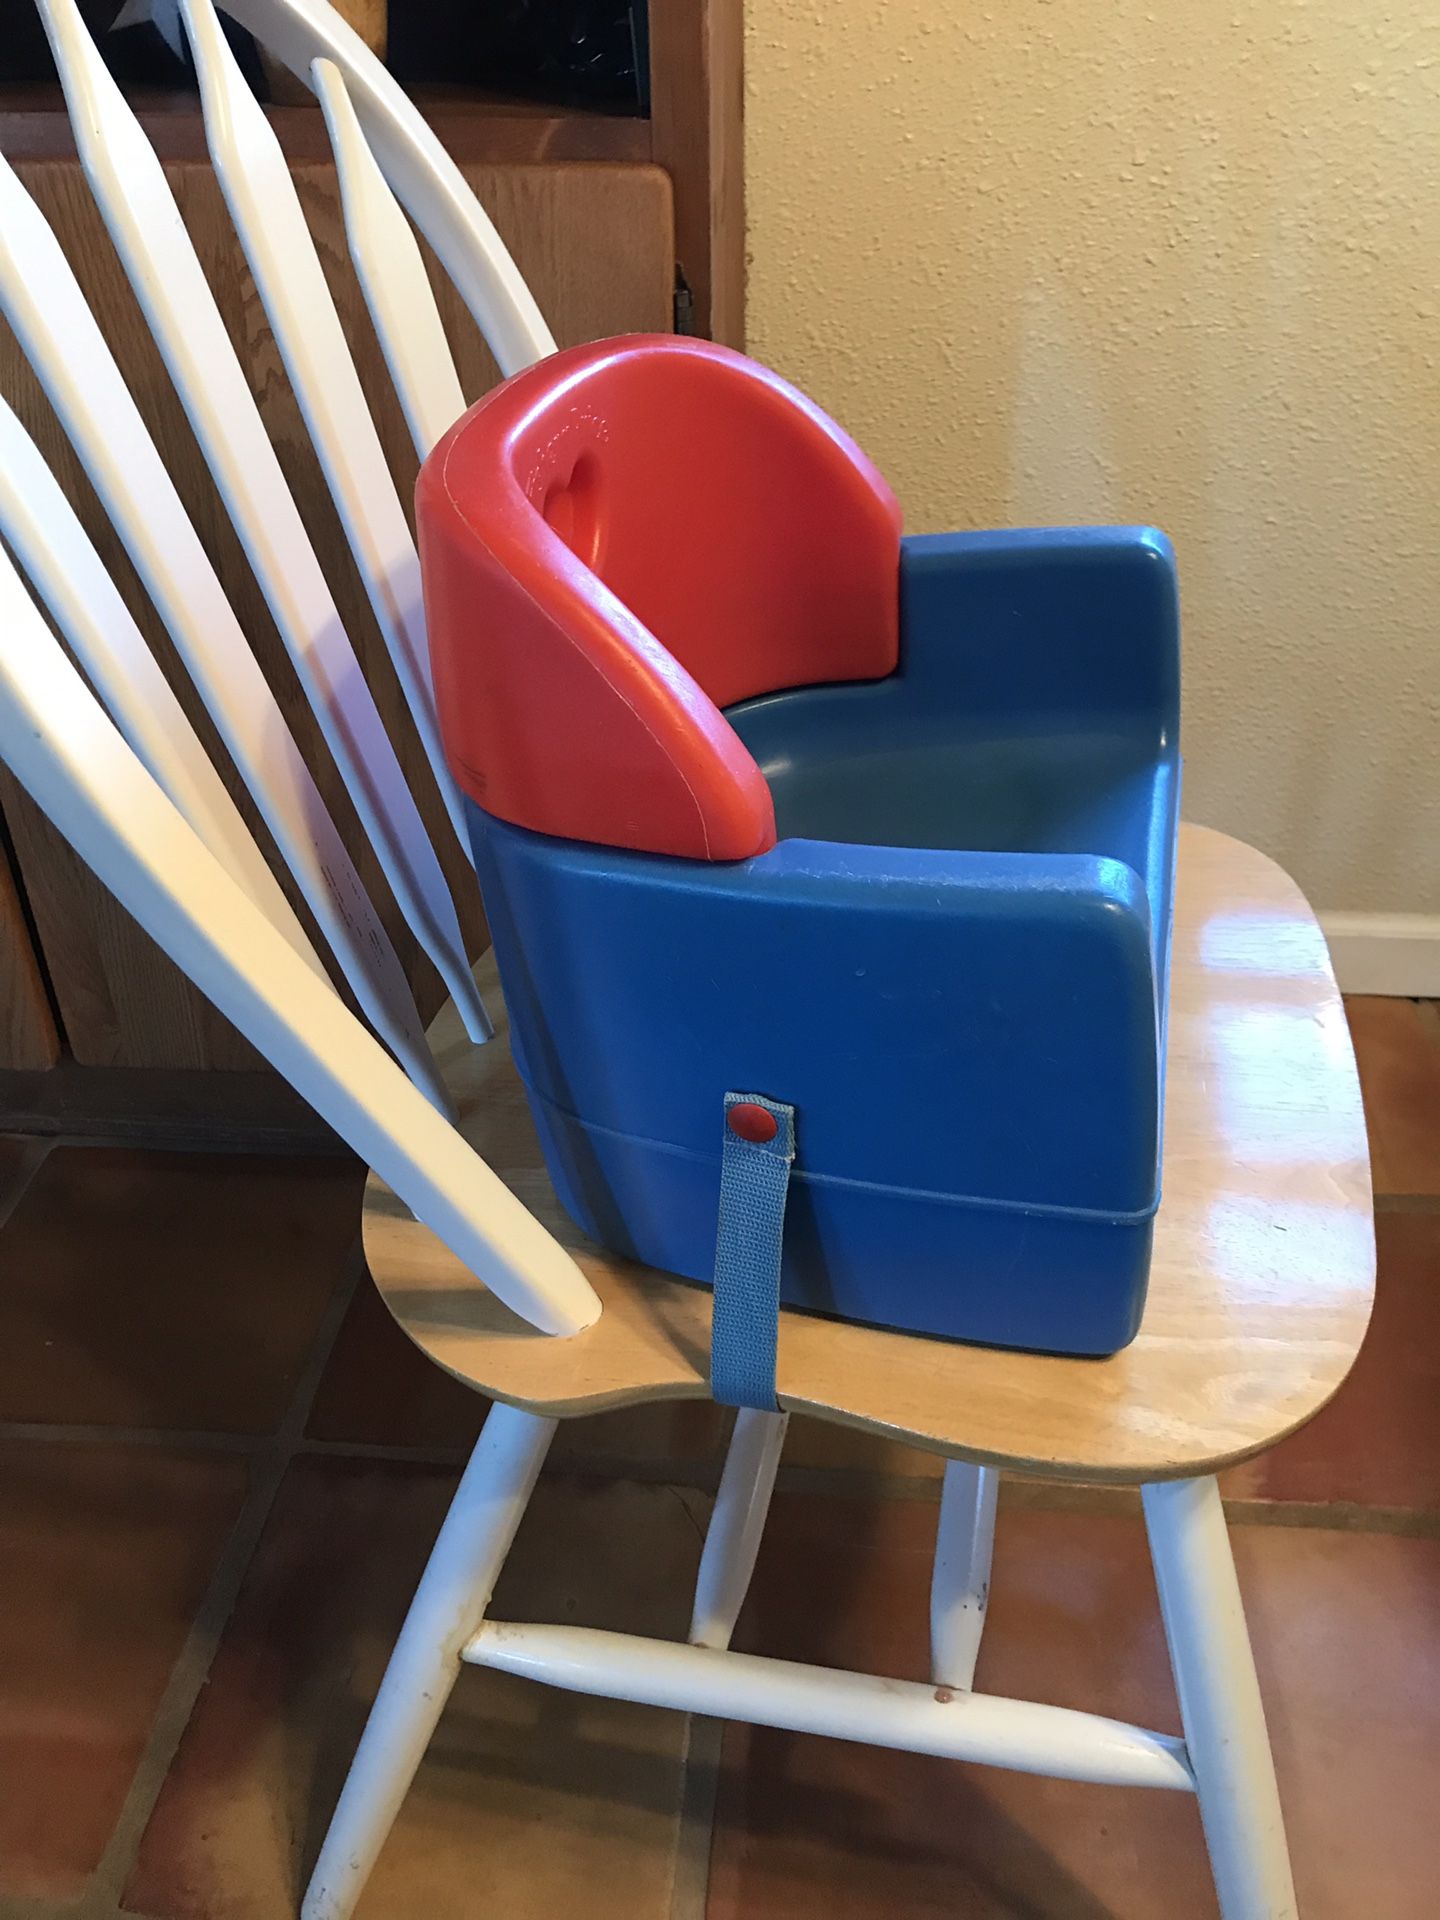 Fisher Price child chair booster seat